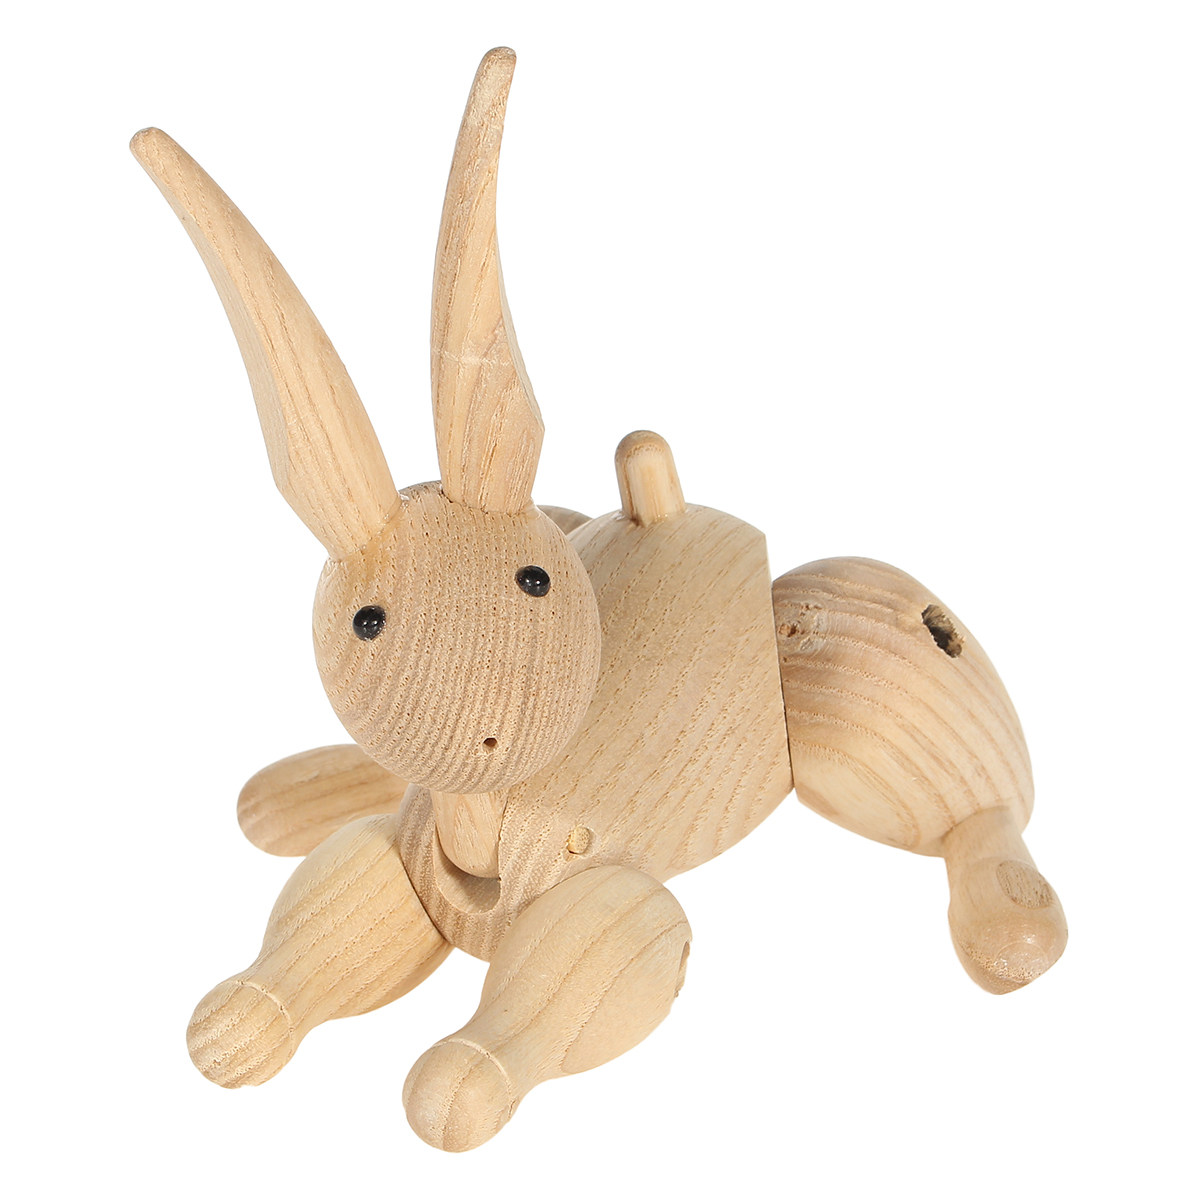 Wooden Carving Miss Rabbit